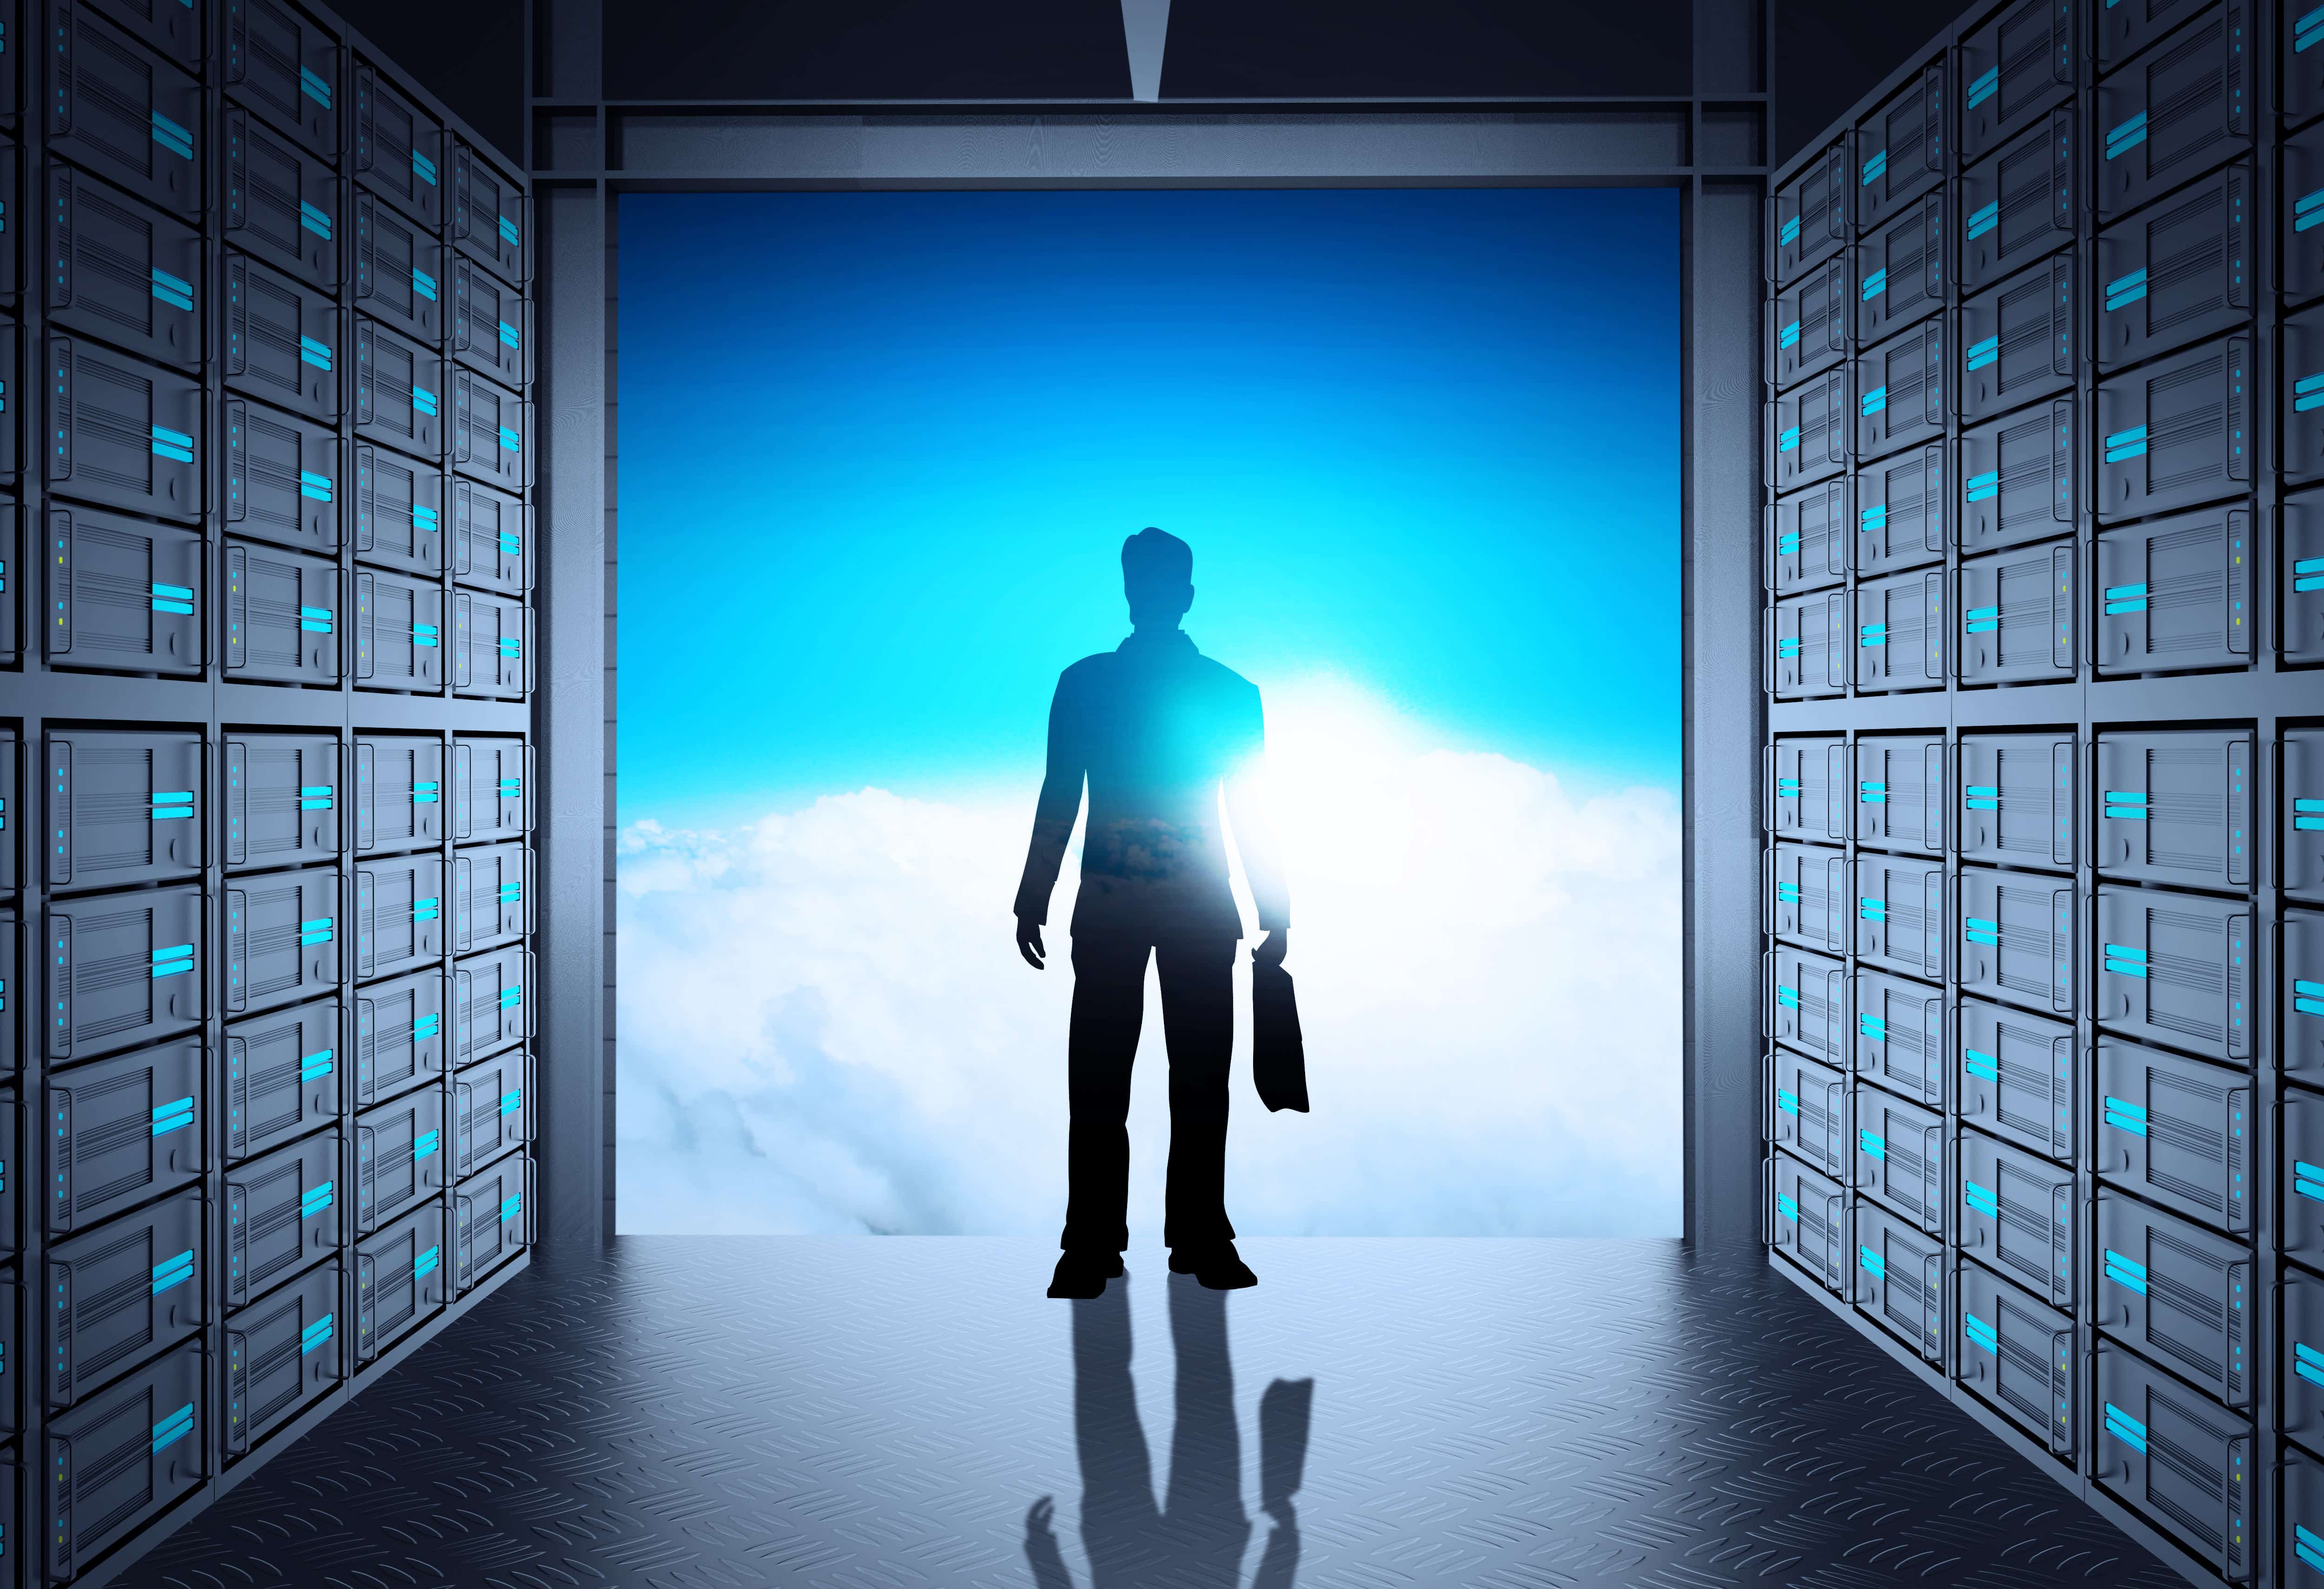 engineer business man in 3d network server room and cloud outside as concept